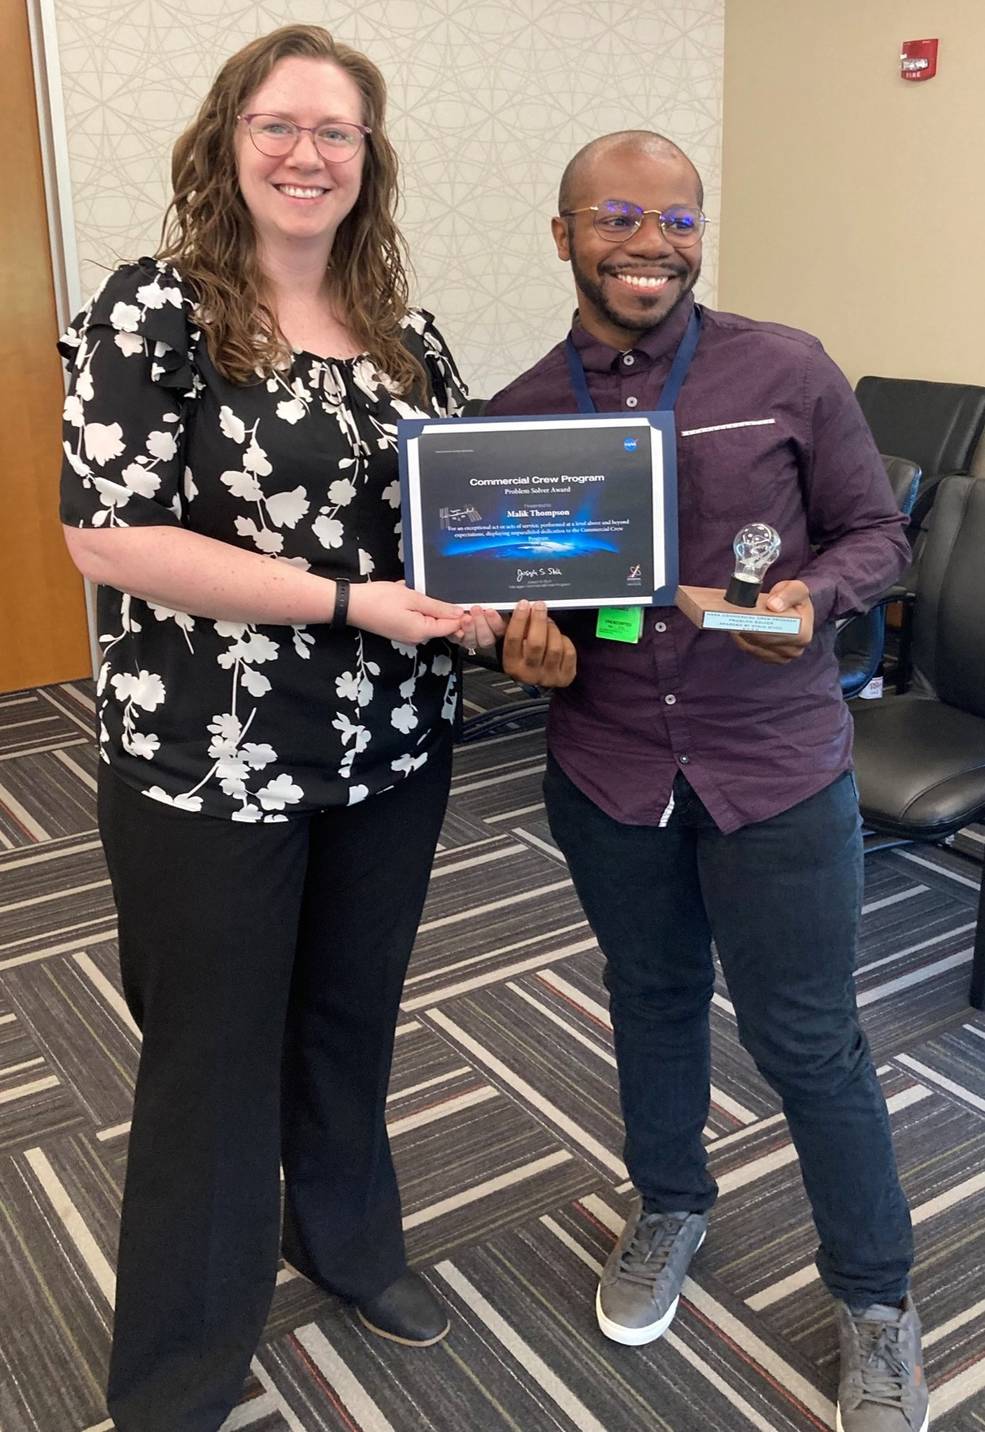 Lisa McCollum, deputy manager of the Commercial Crew Program Launch Vehicle Systems Office, presents Malik Thompson with the Problem Solver Award on June 1.